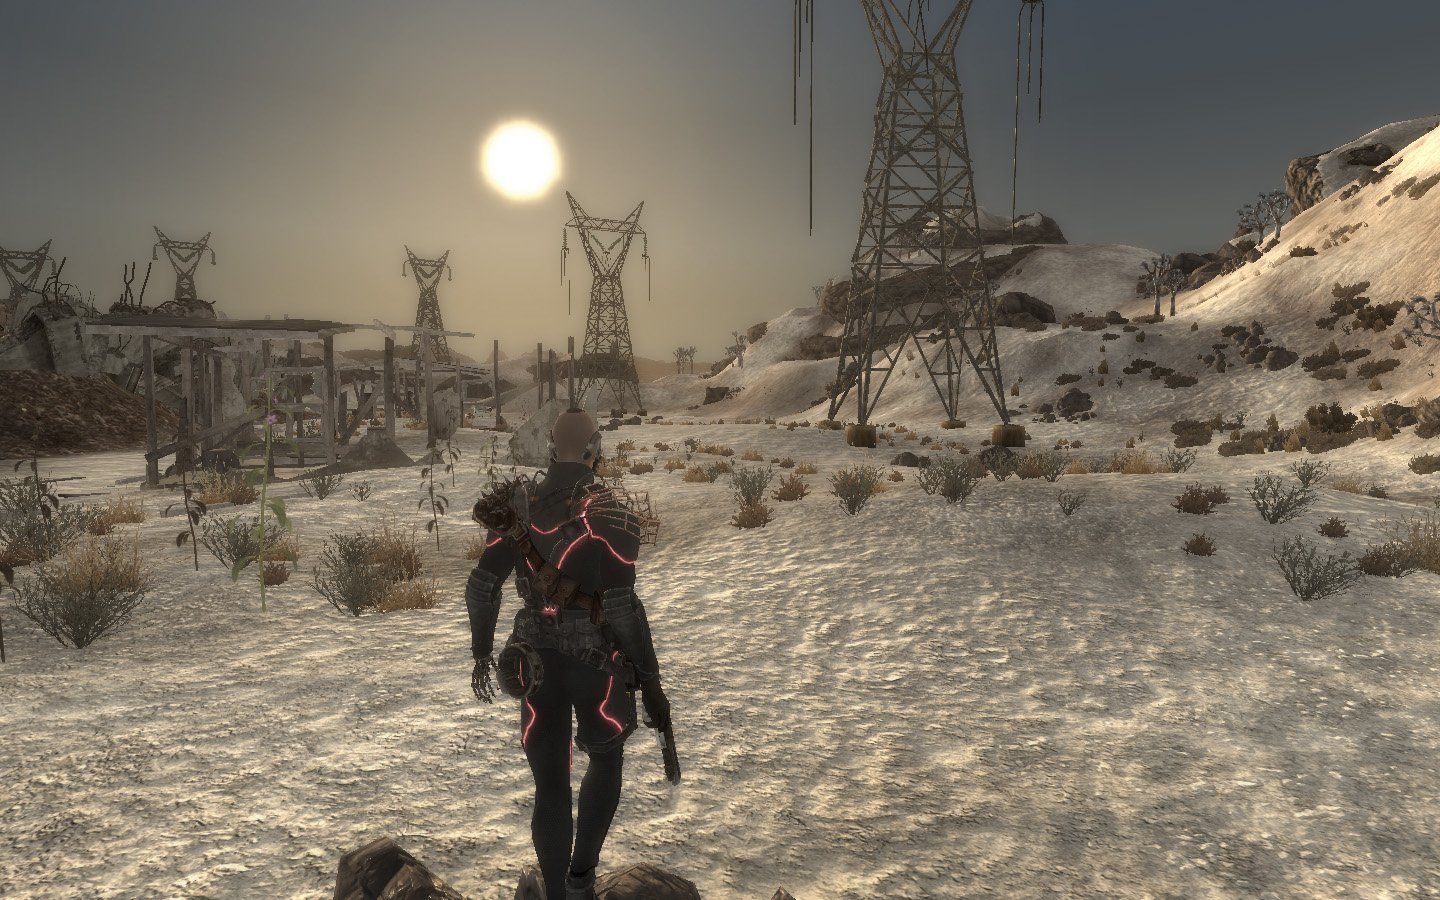 Fallout new nexus. Фоллаут Нью Вегас. Fallout 4 New Vegas. Фоллаут 4 Нью Вегас. Фоллаут 3 Нью Вегас.